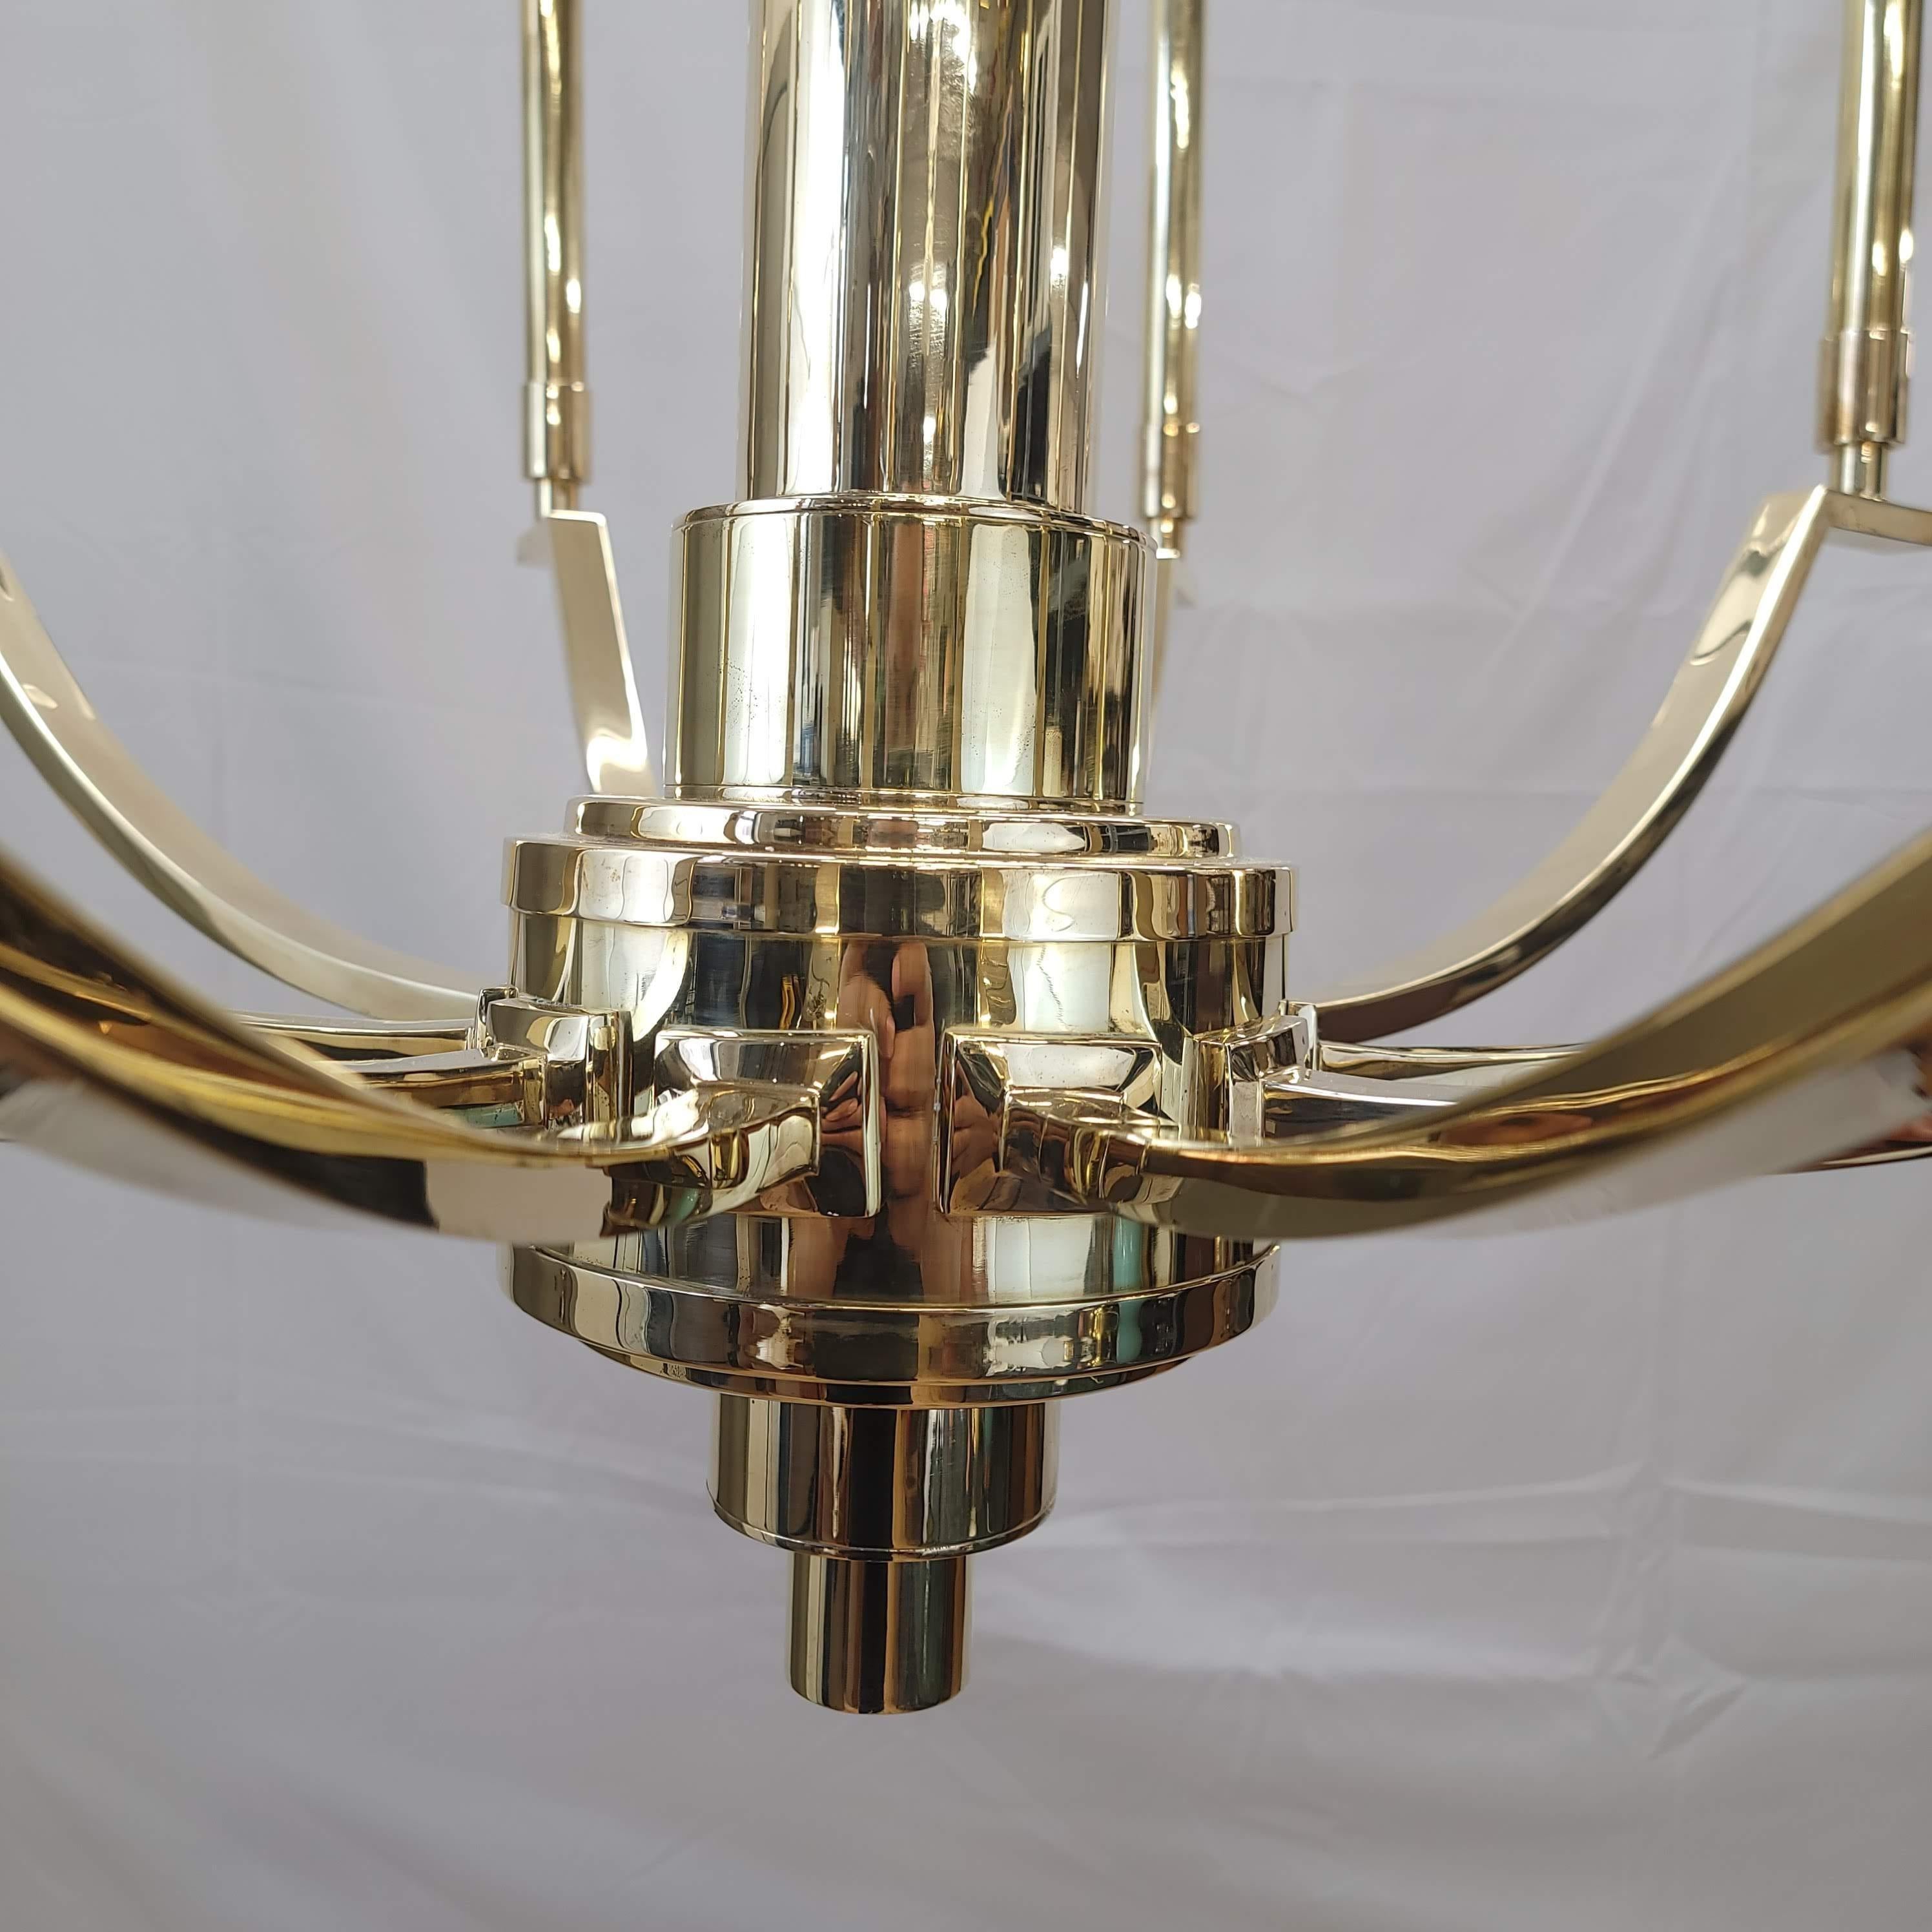 Elevate your space with our Majestic Mid-Century Modern Chandelier. Exuding sophistication, this piece features a radiant polished brass finish that brings a touch of glamour to any room. The streamlined design boasts ten slender arms, each